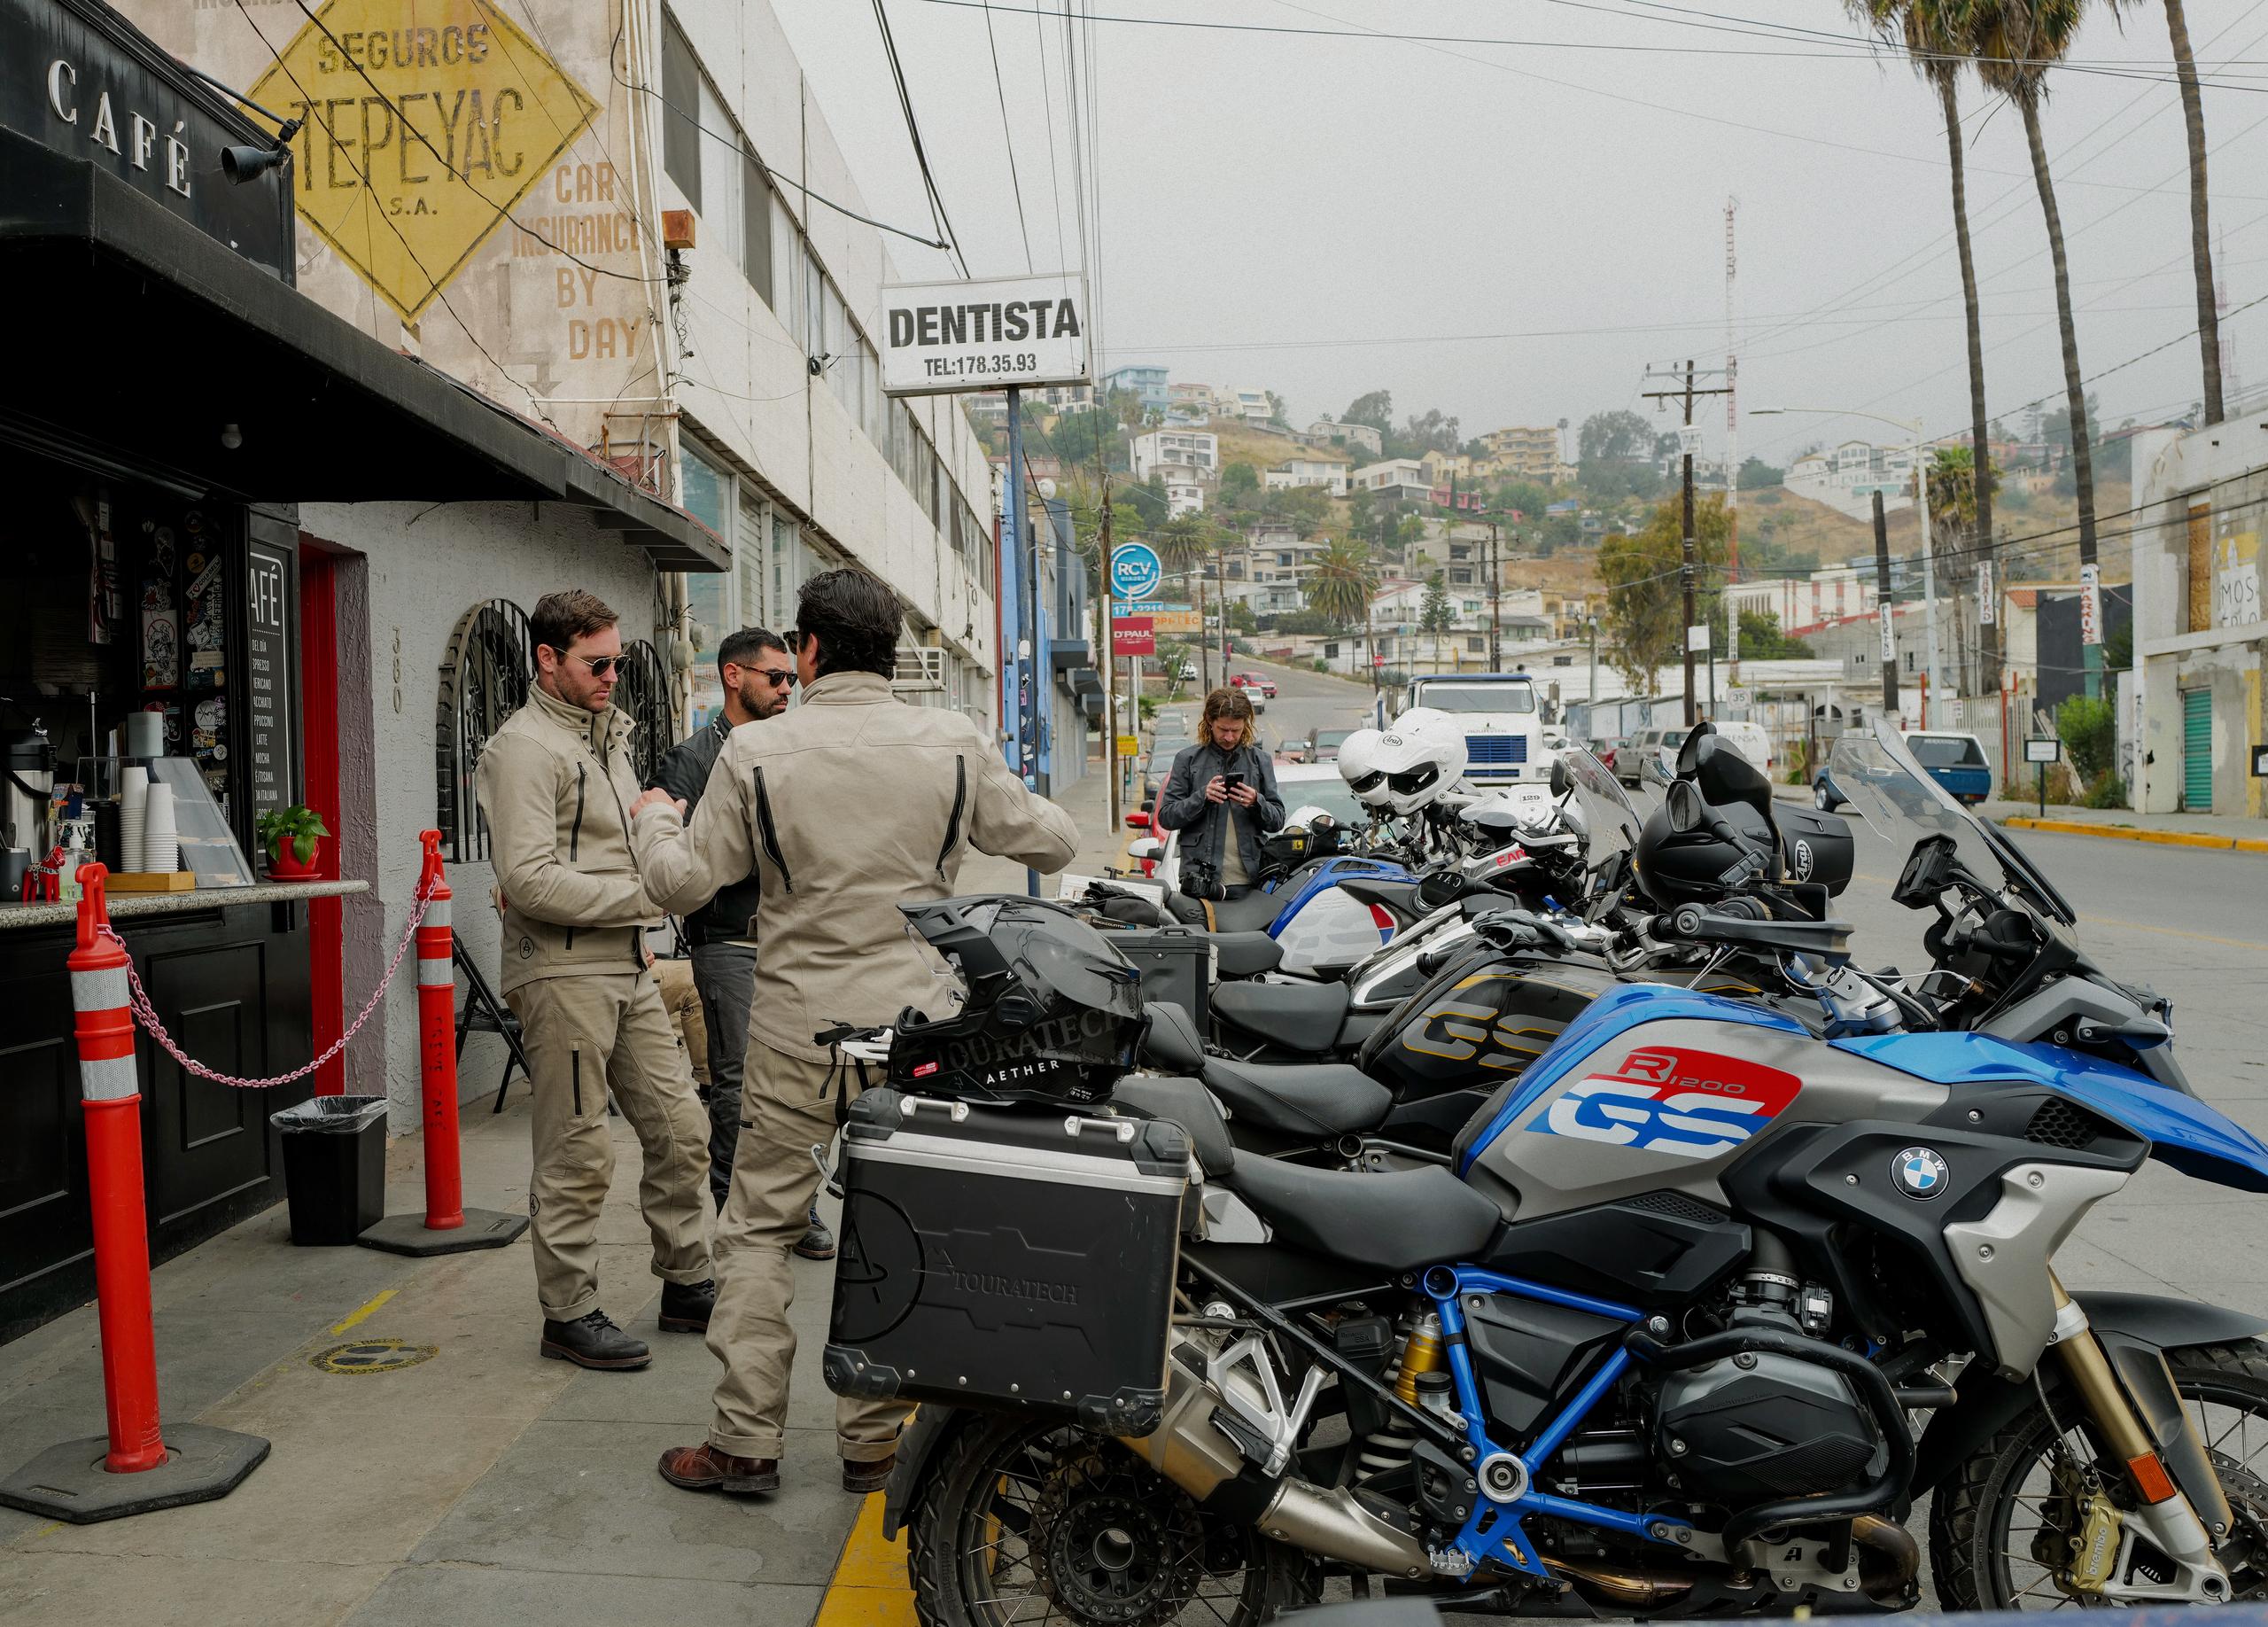 Motorcyclists standing on sidewalk next to motorcycles in city street of Ensenada